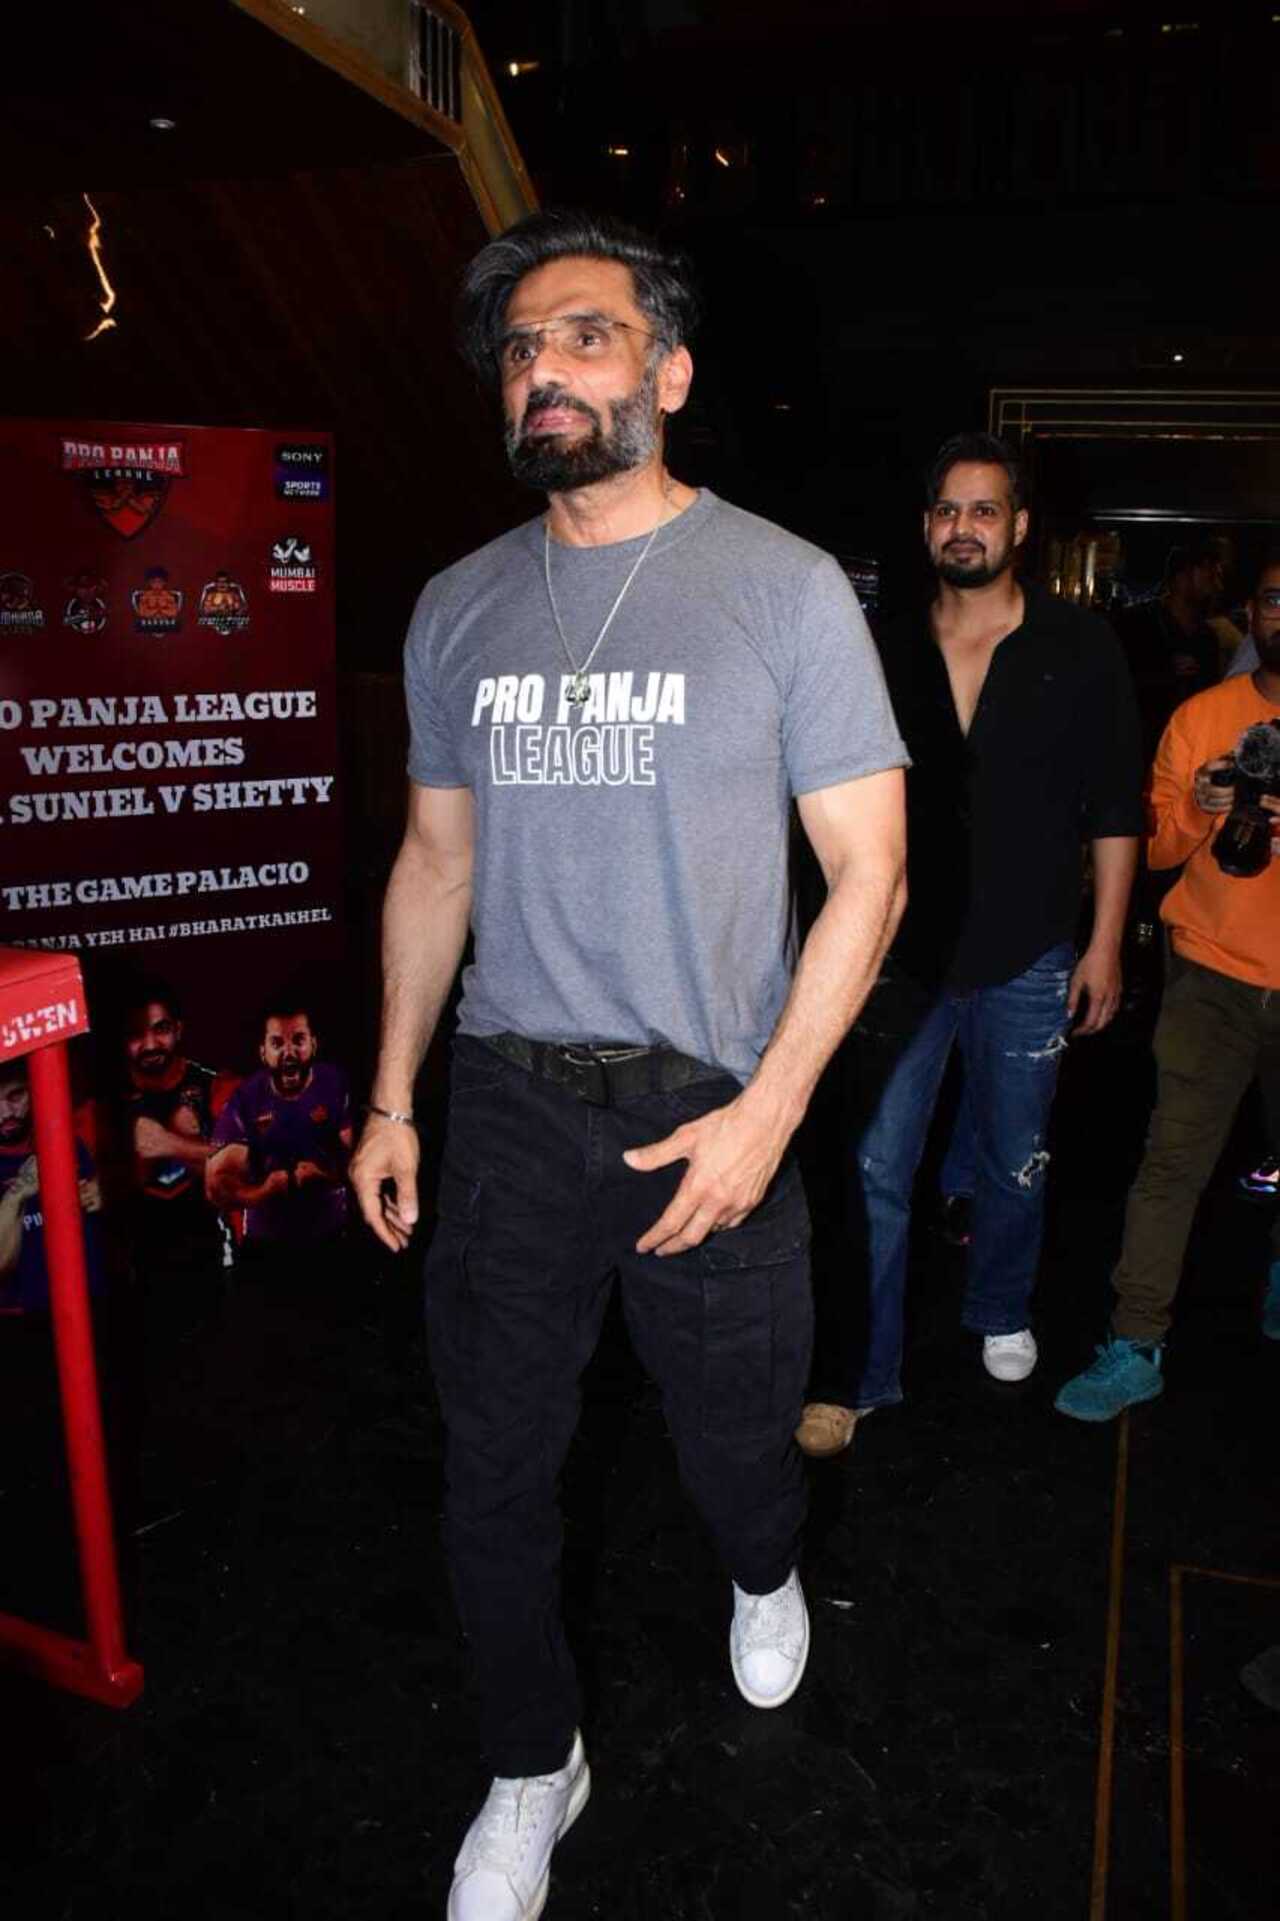 Suniel Shetty opted for a grey T-shirt with black jeans as he was snapped attending Pro Panja League's press meet